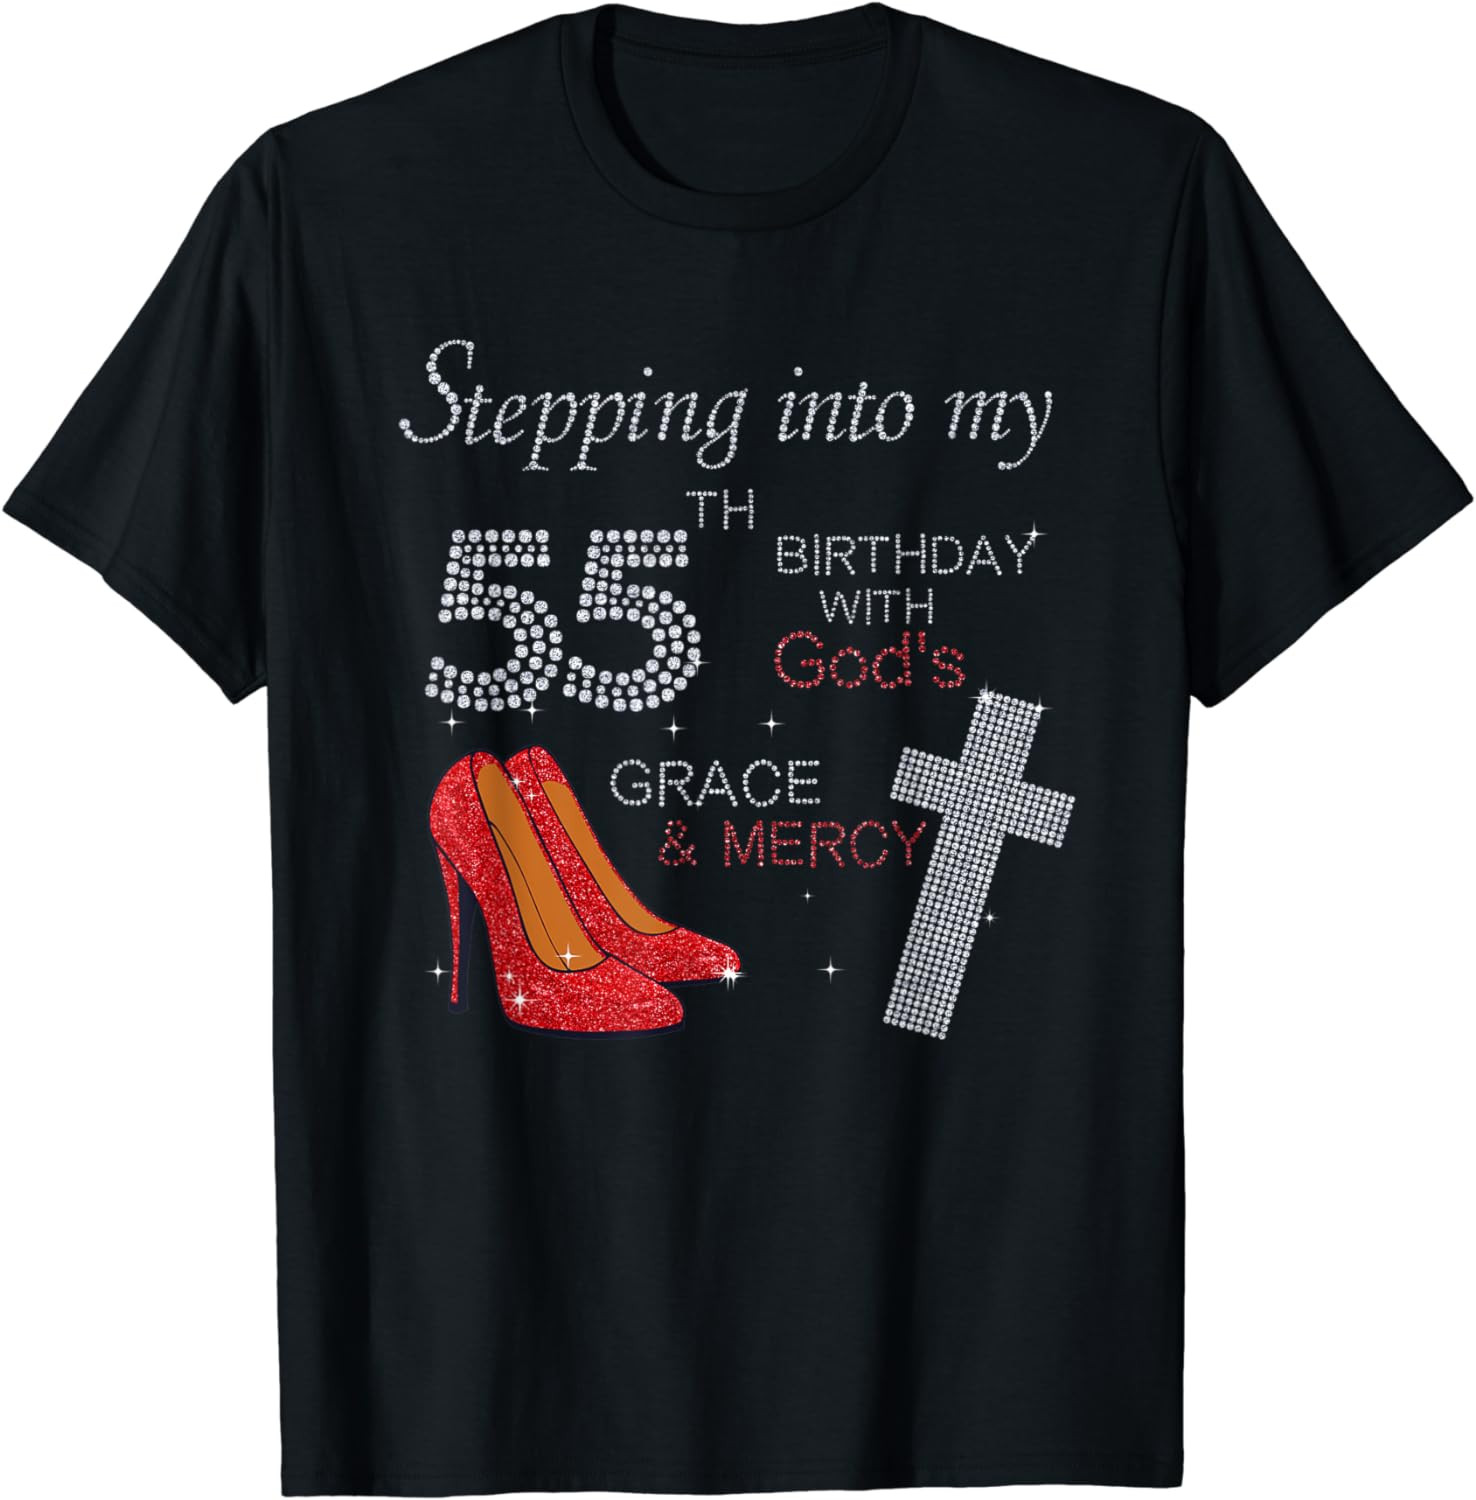 Stepping Into My 55th Birthday With God's Grace Mercy Heels T-Shirt